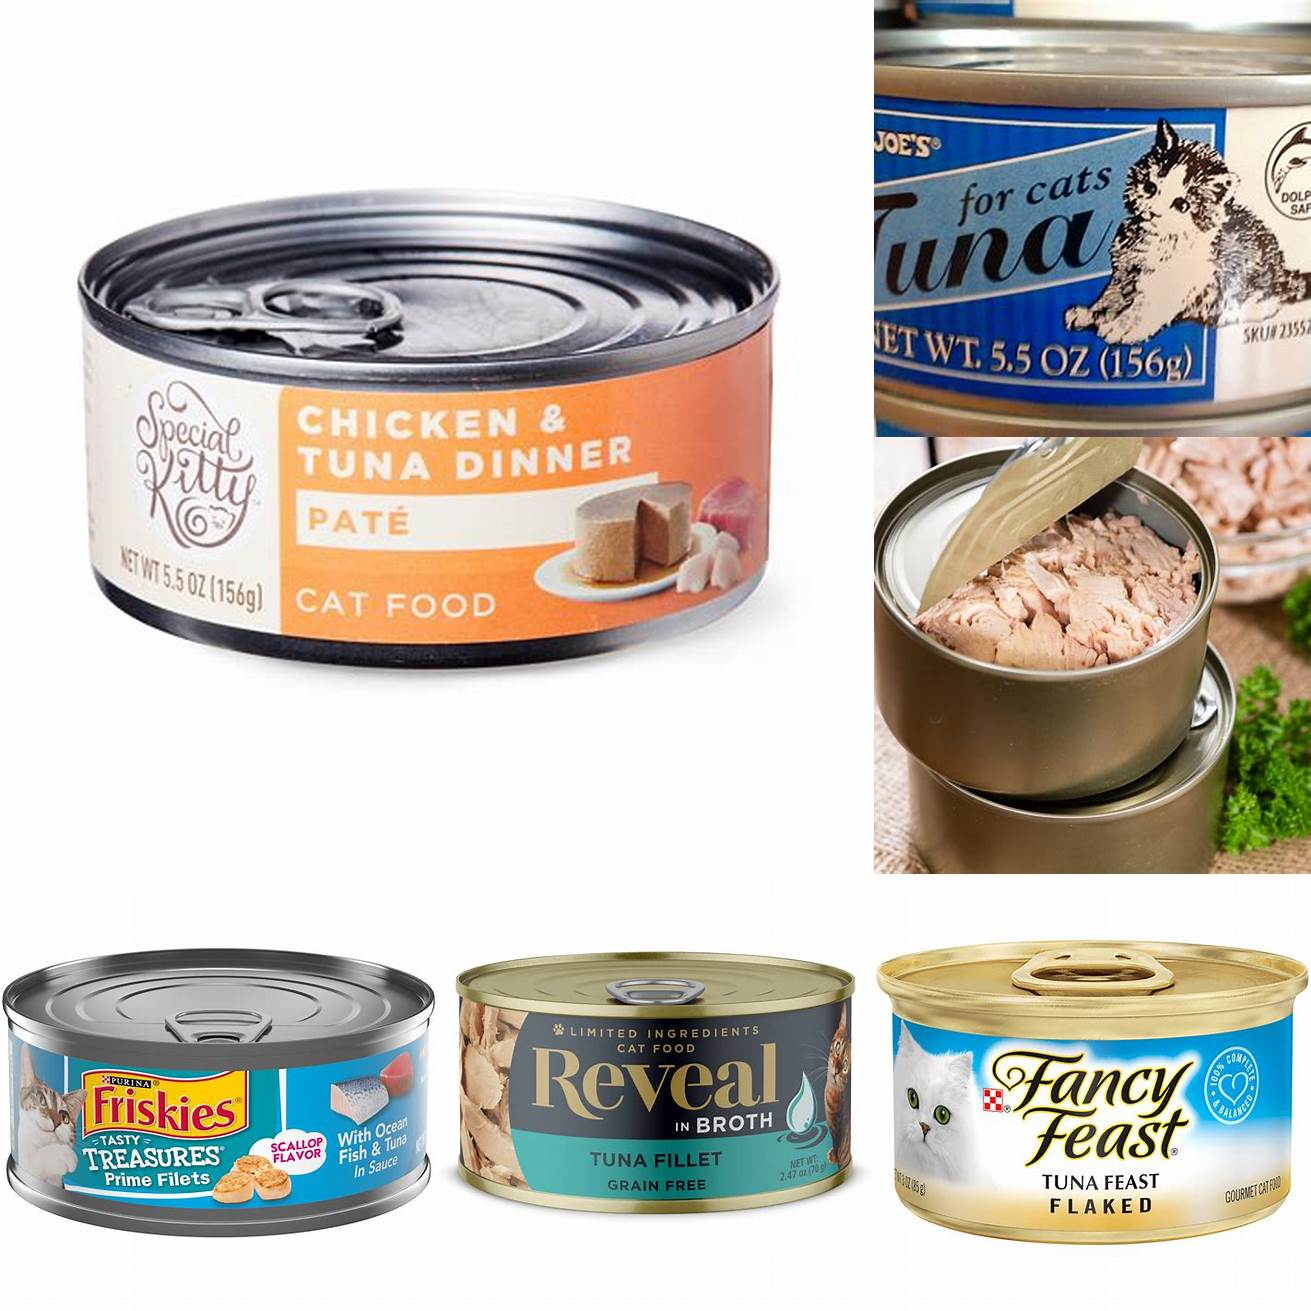 Canned tuna is inexpensive and easy to find